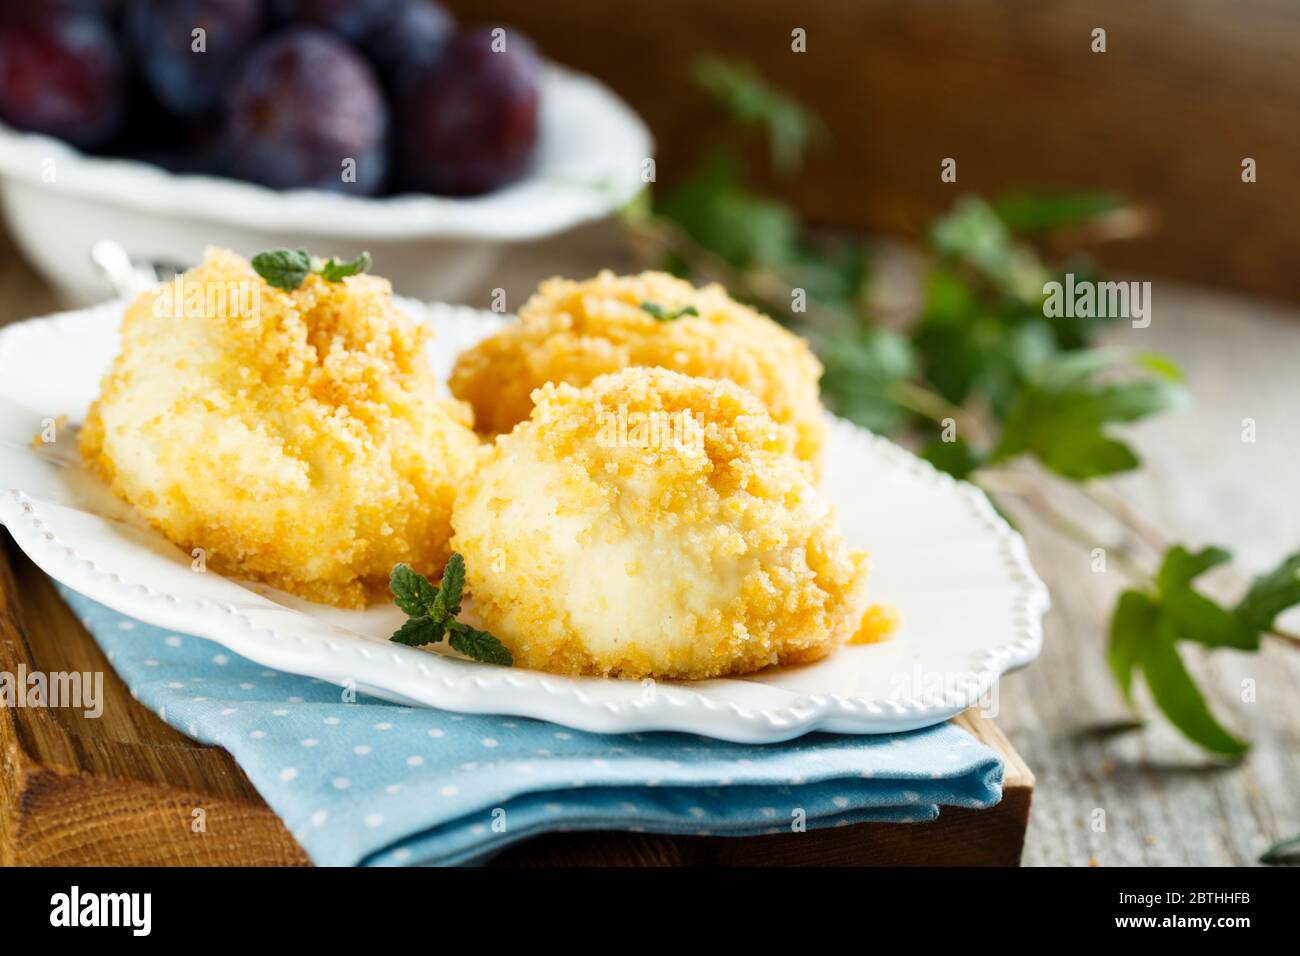 Traditional homemade sweet Austrian dumplings with plums Stock Photo